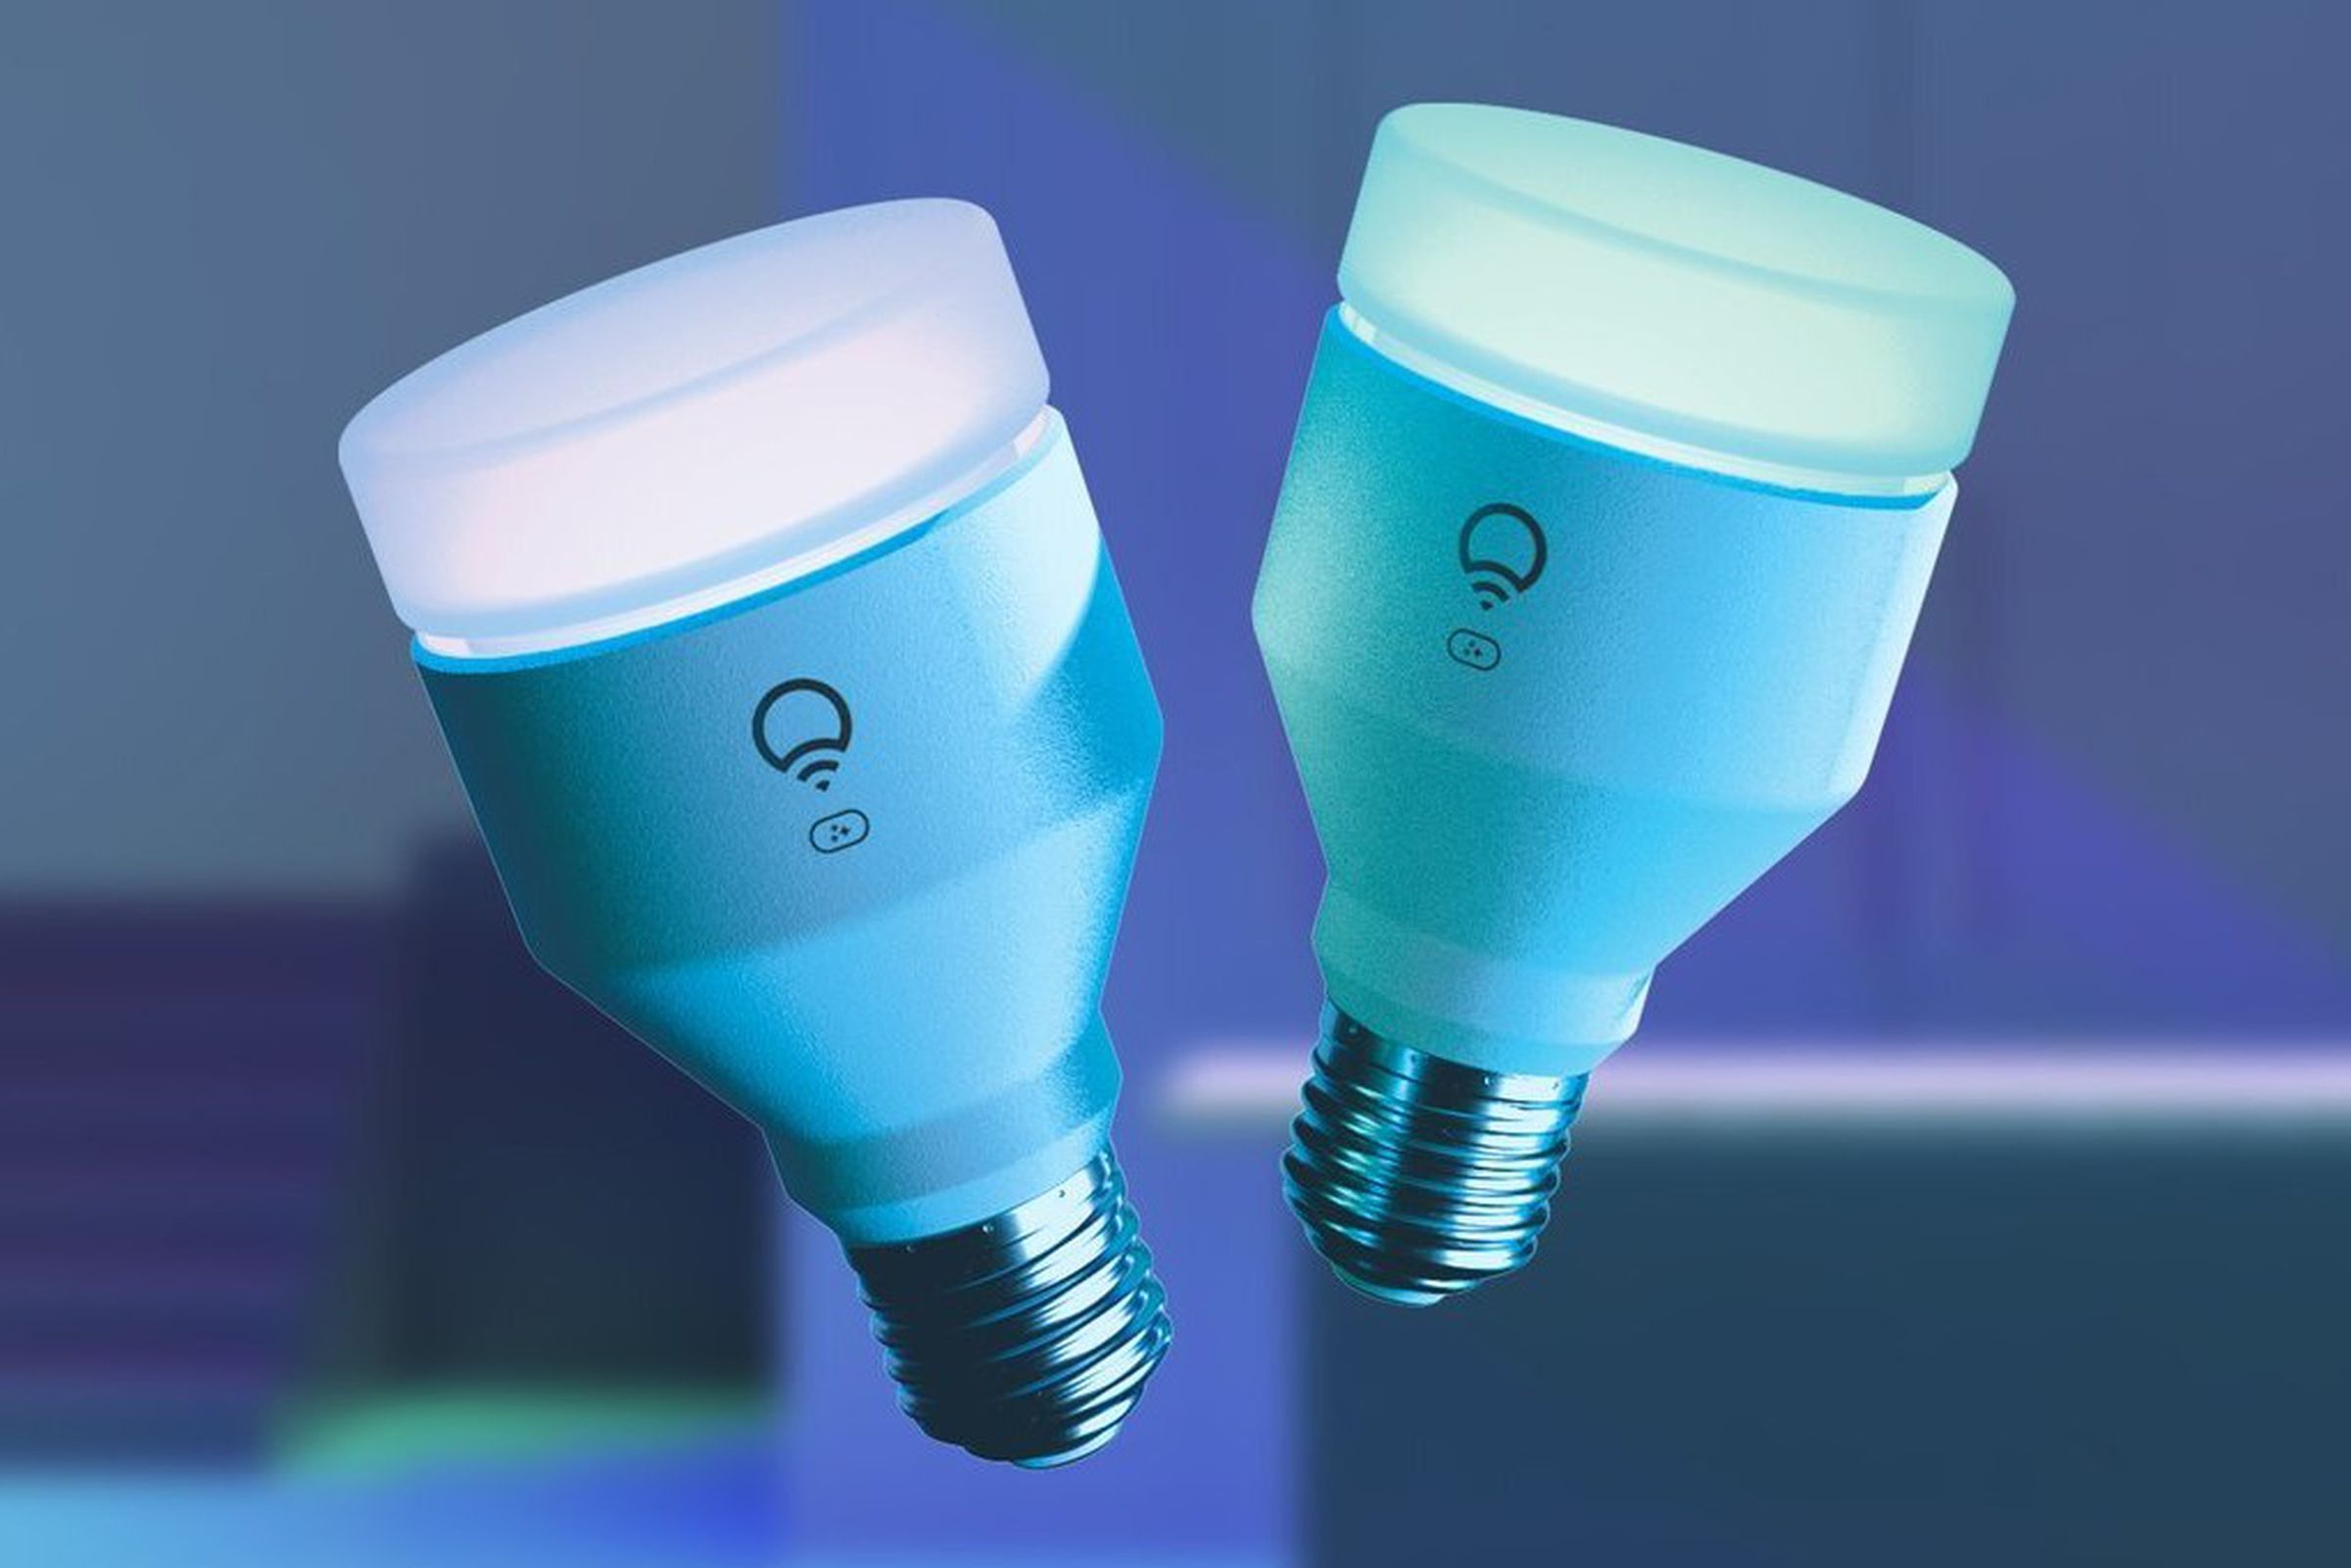 Outwardly, the Lifx Clean looks like the company’s other smart bulbs.